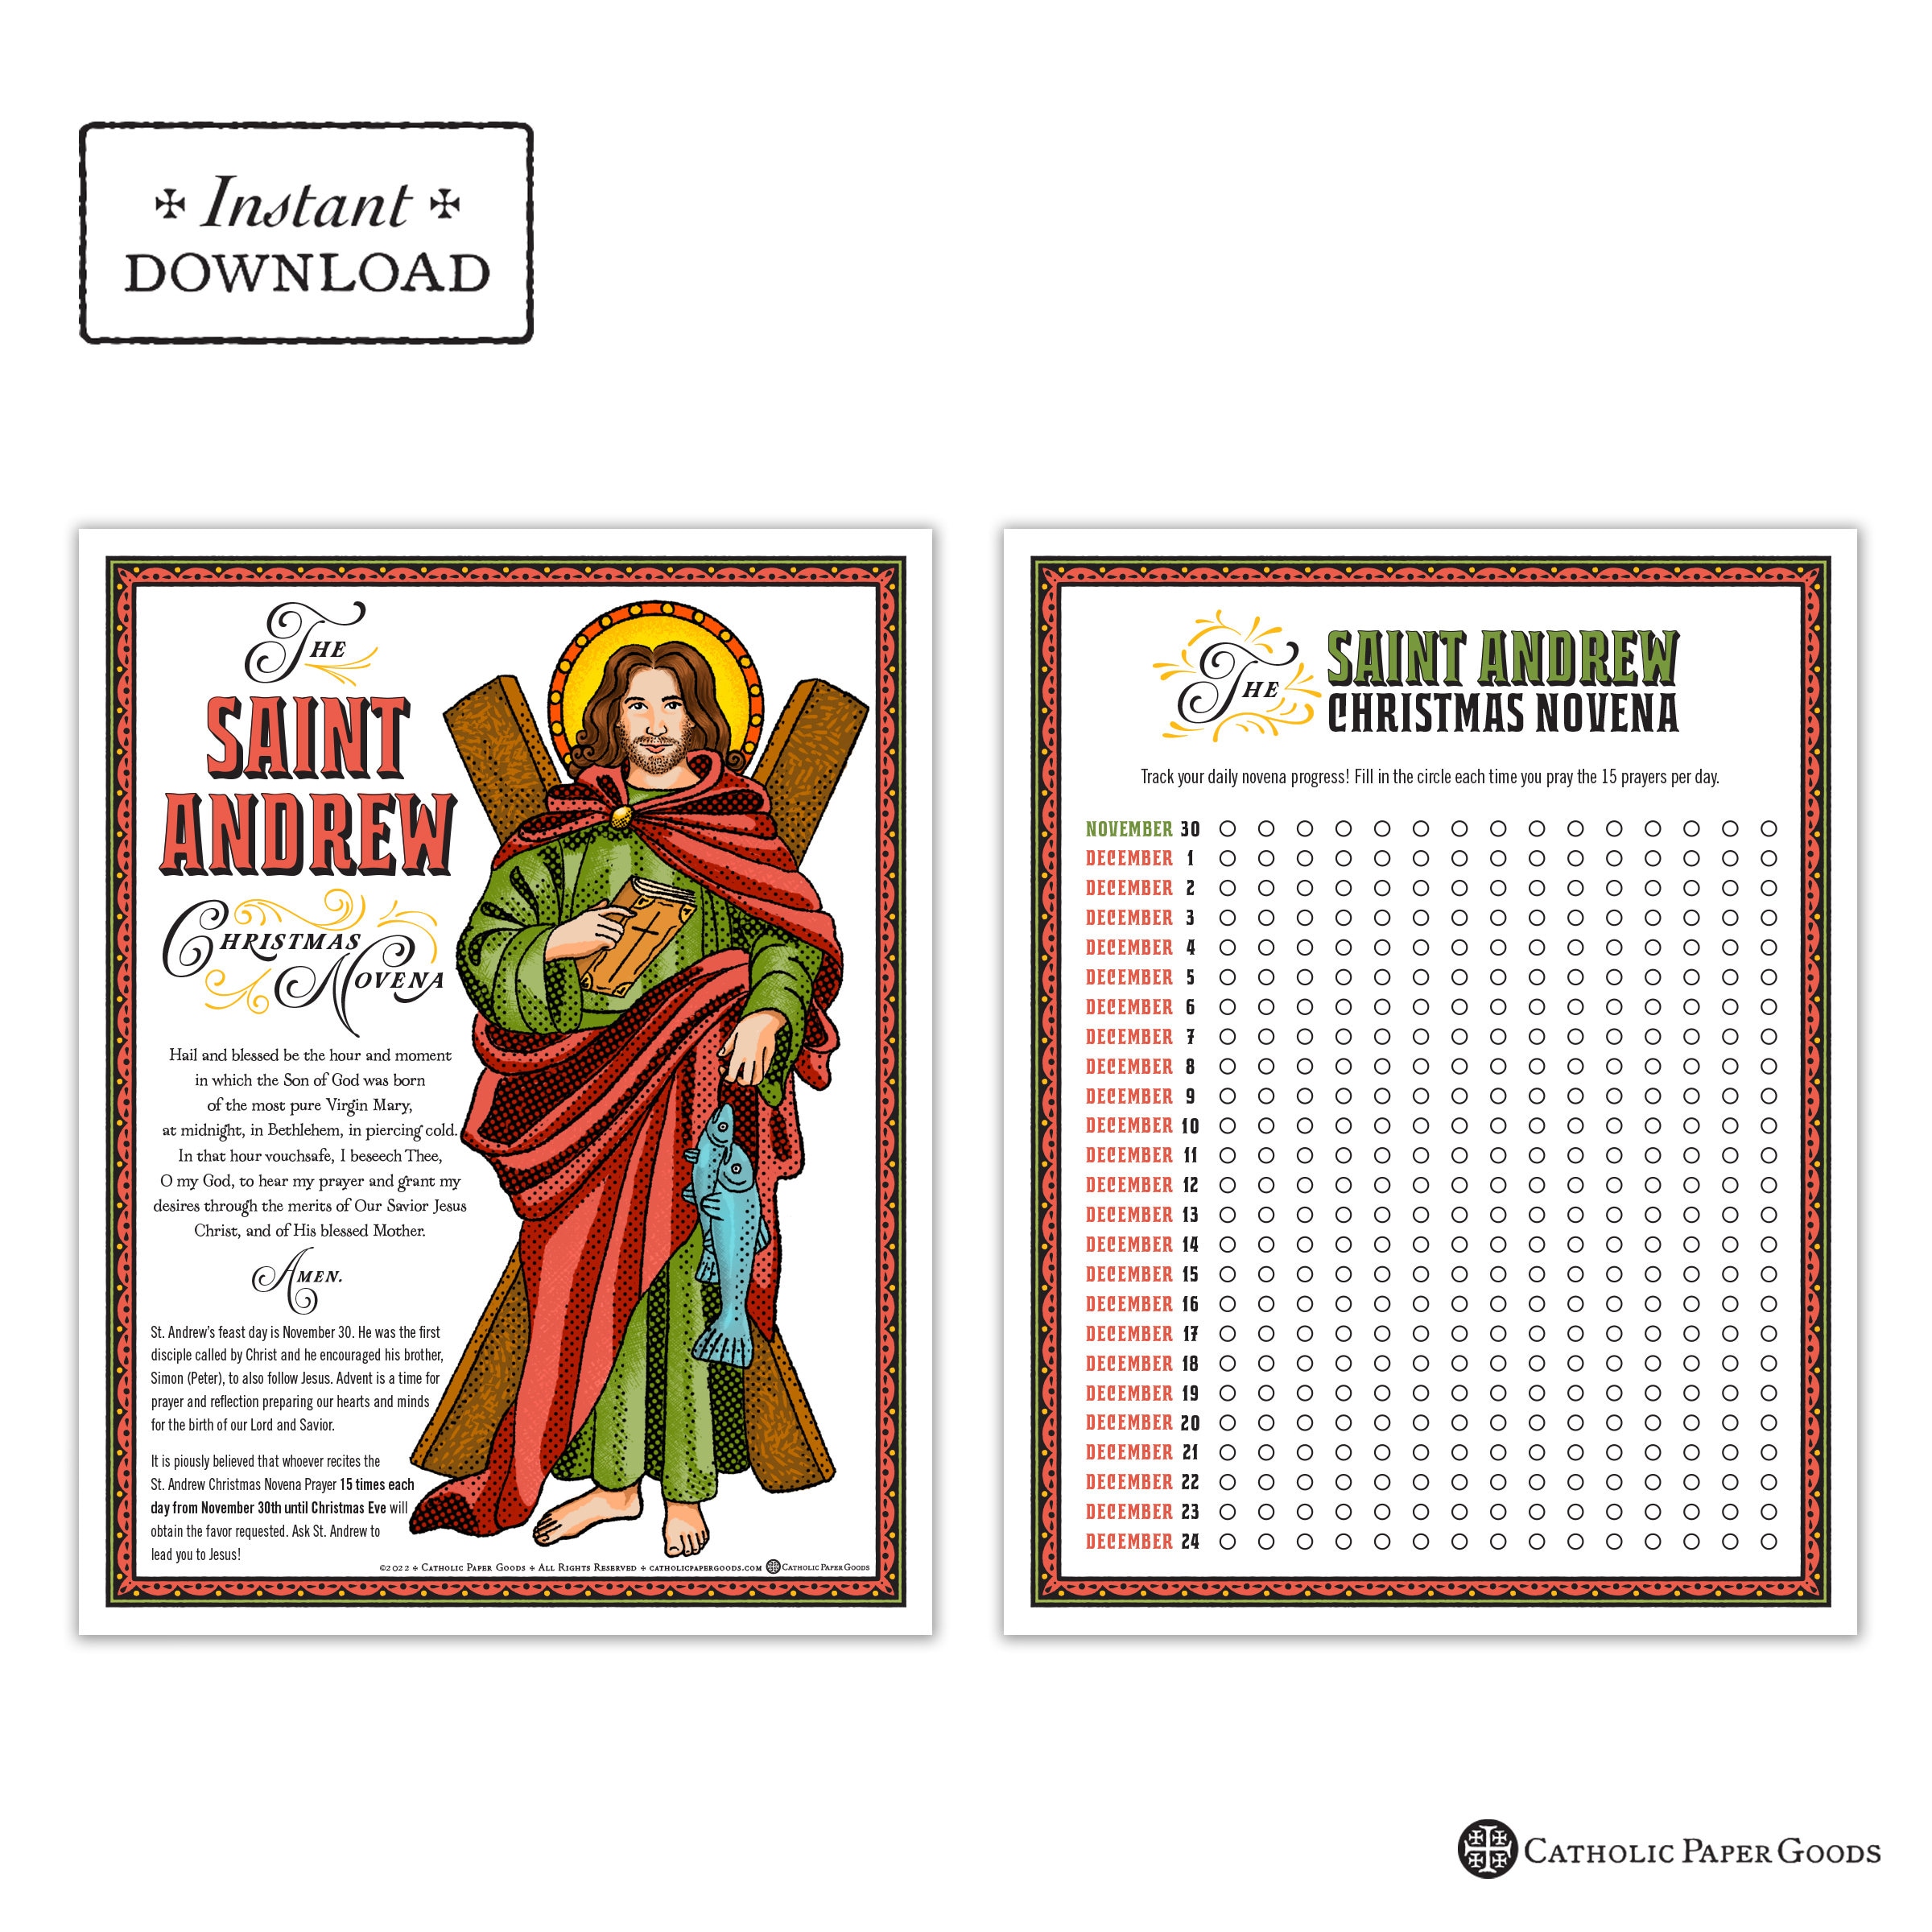 St andrew christmas novena catholic coloring page versions color black and white printable catholic advent activity digital pdf